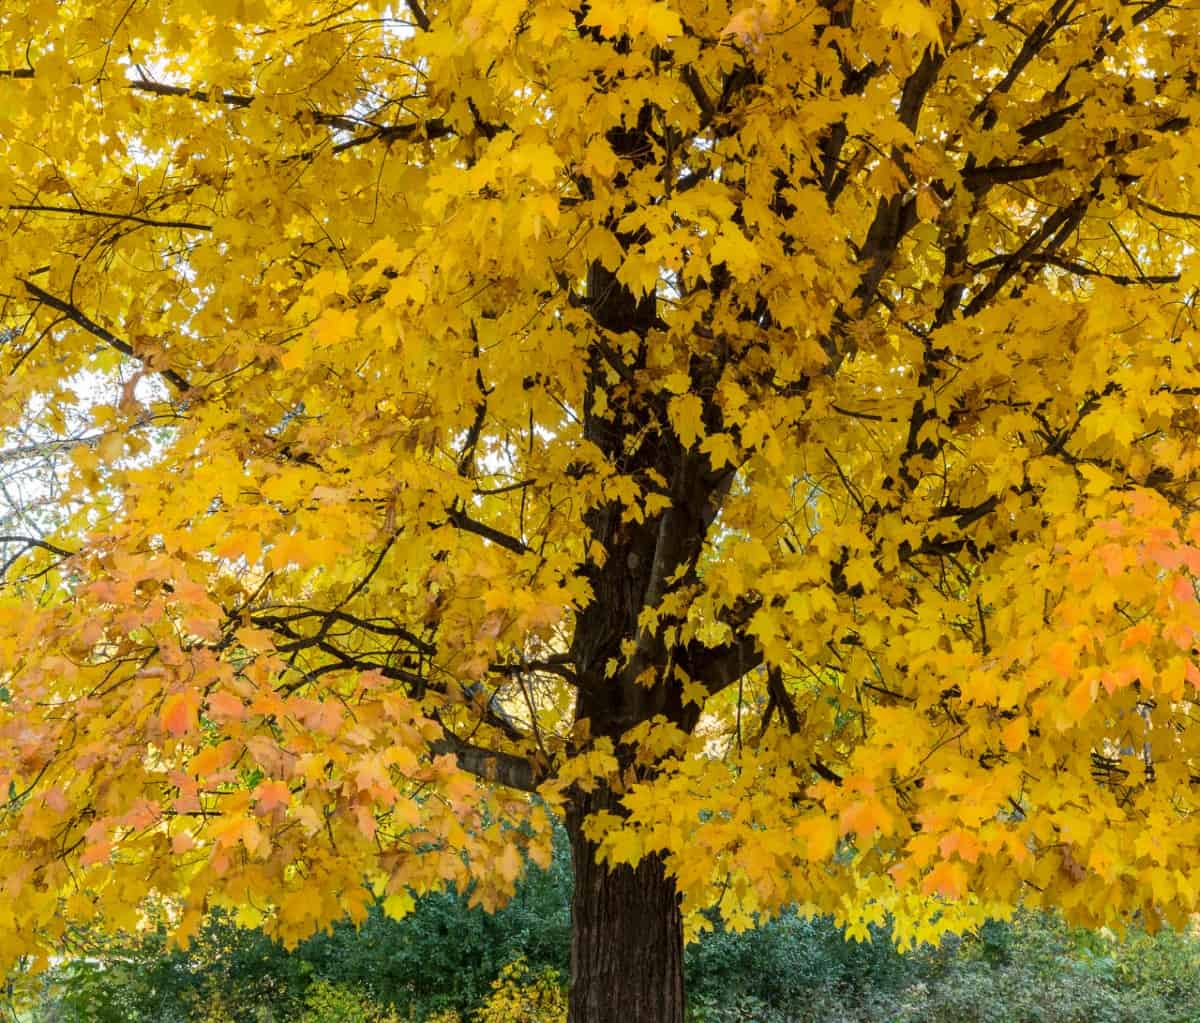 Maple trees offer dramatic fall color before cold weather arrives.